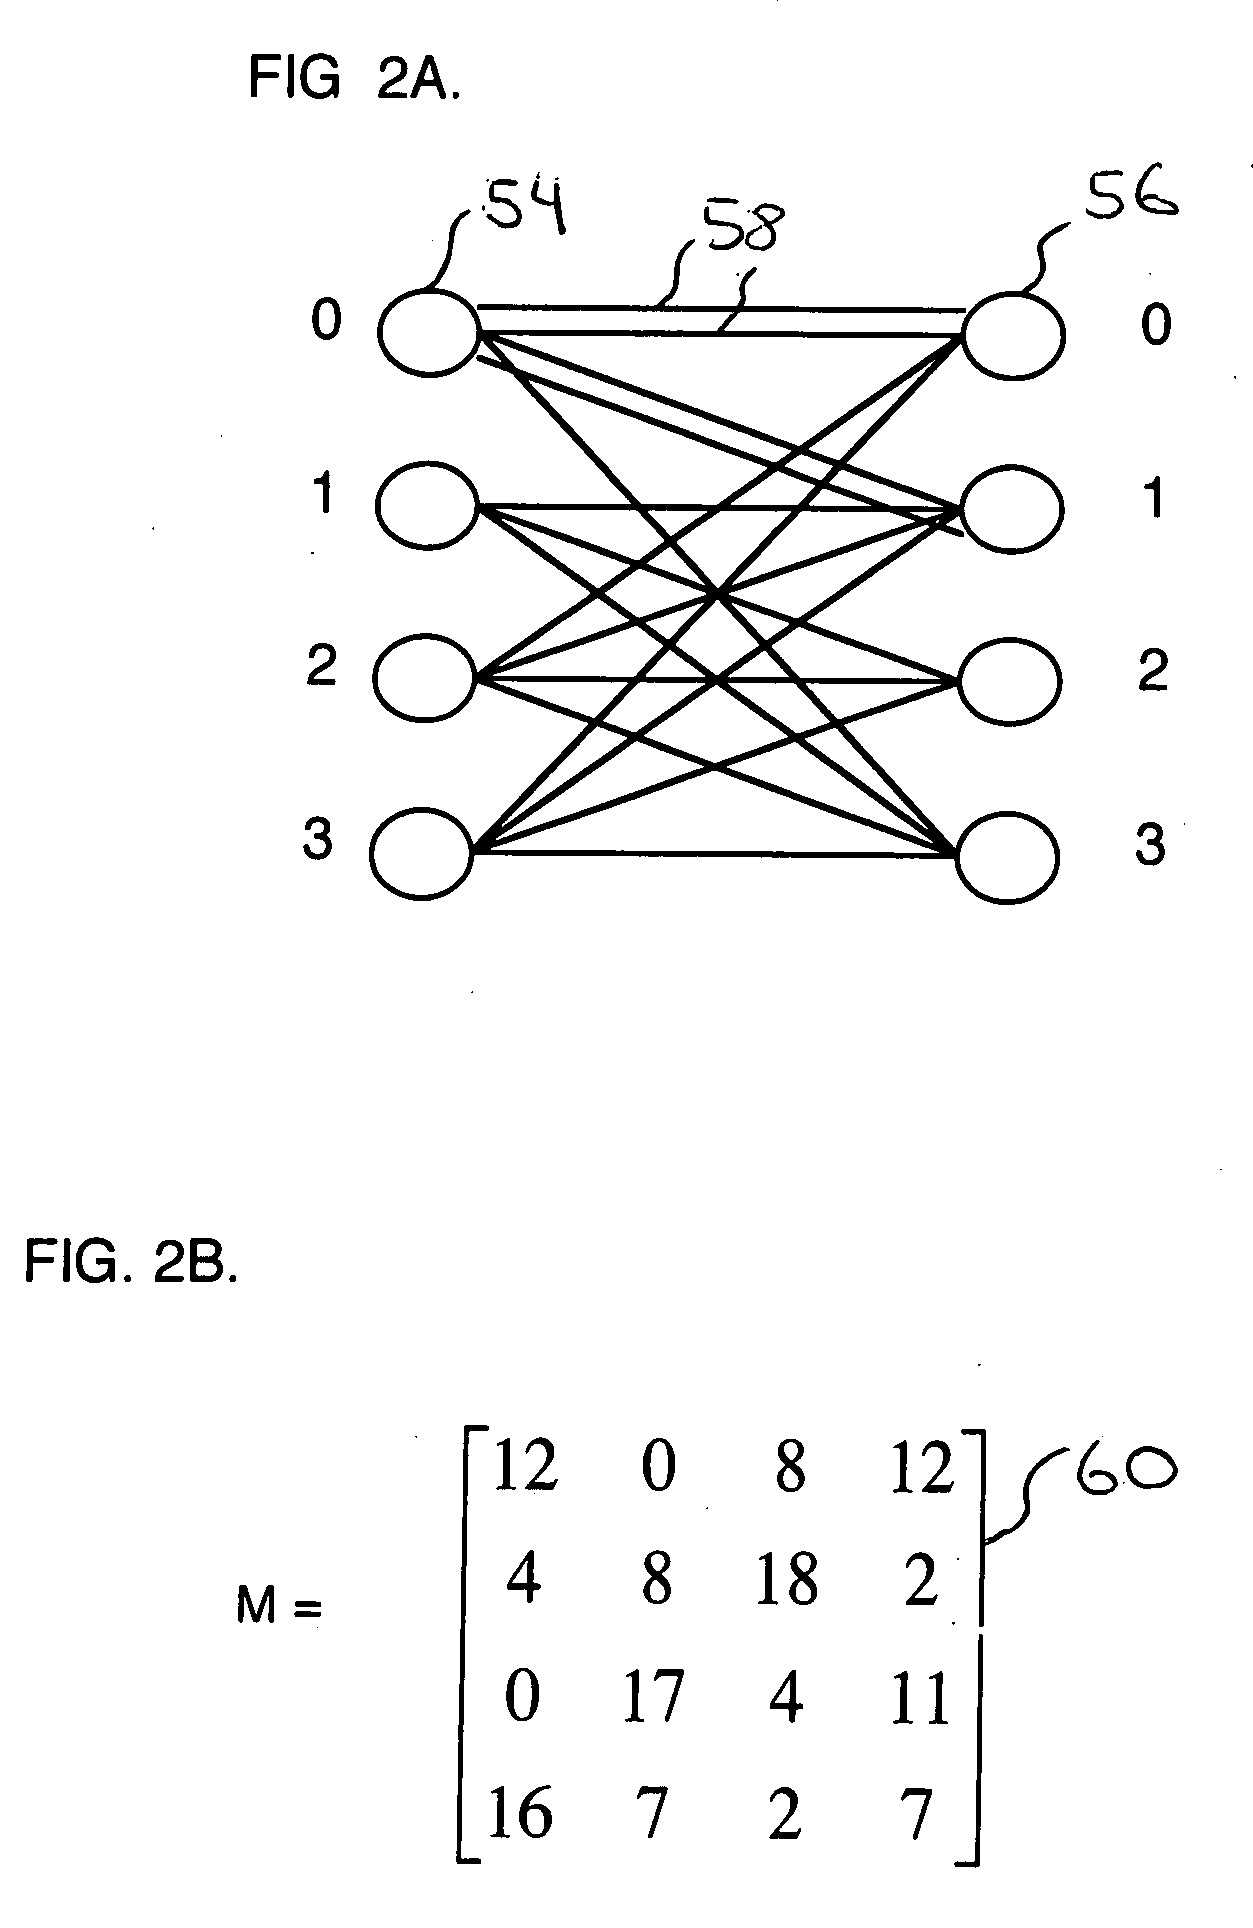 Method and apparatus to schedule packets through a crossbar switch with delay guarantees